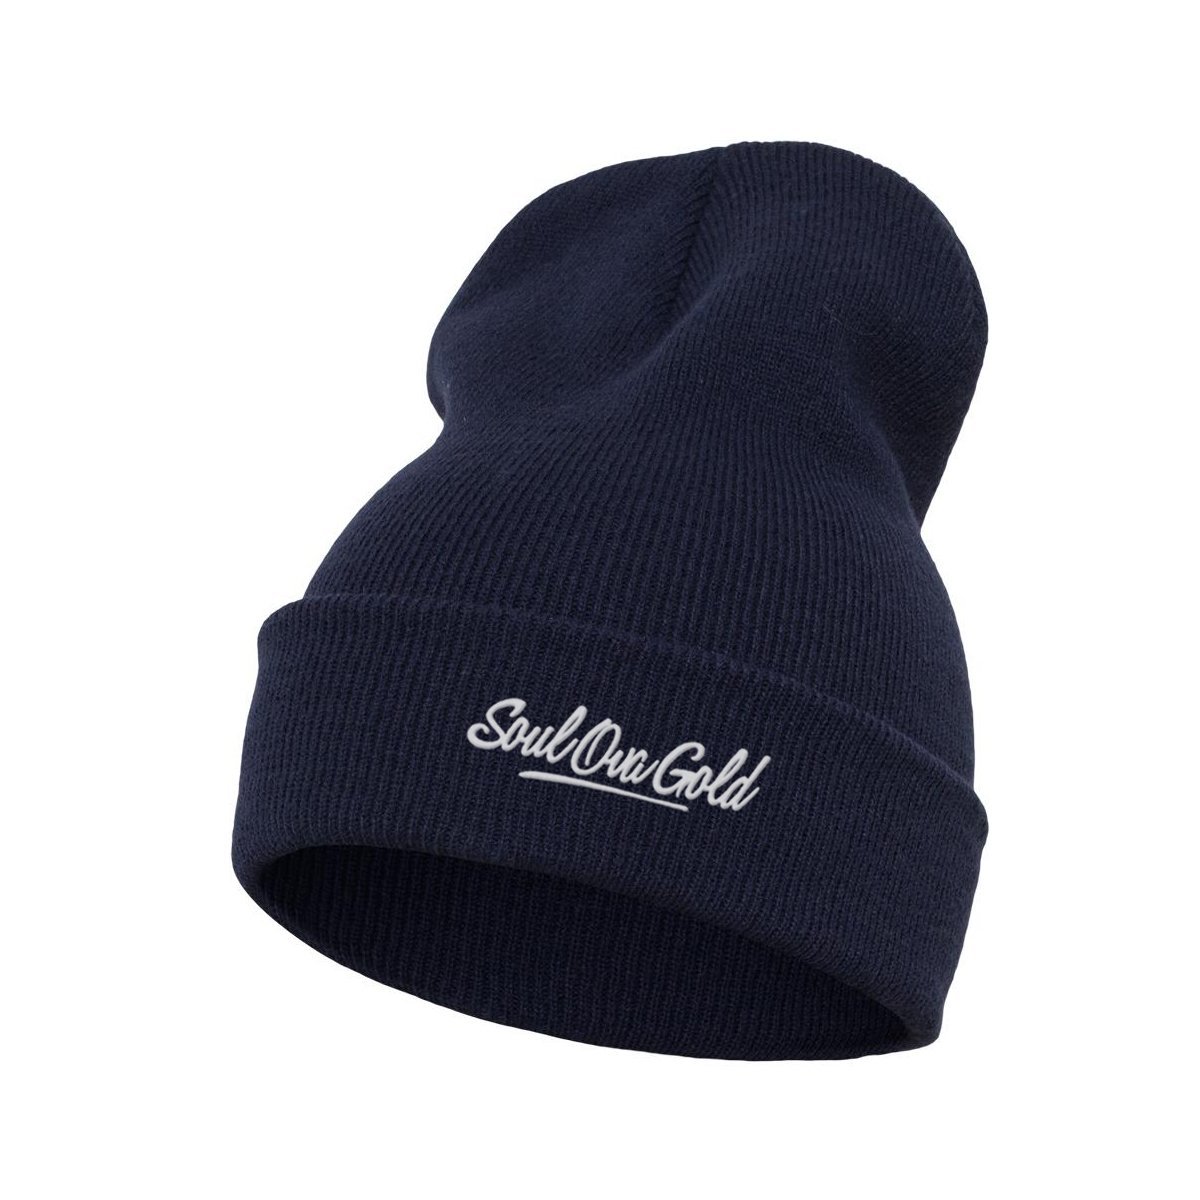 Soul Ova Gold Beanies Stick To The Script Embroidered Beanie (Navy Blue)